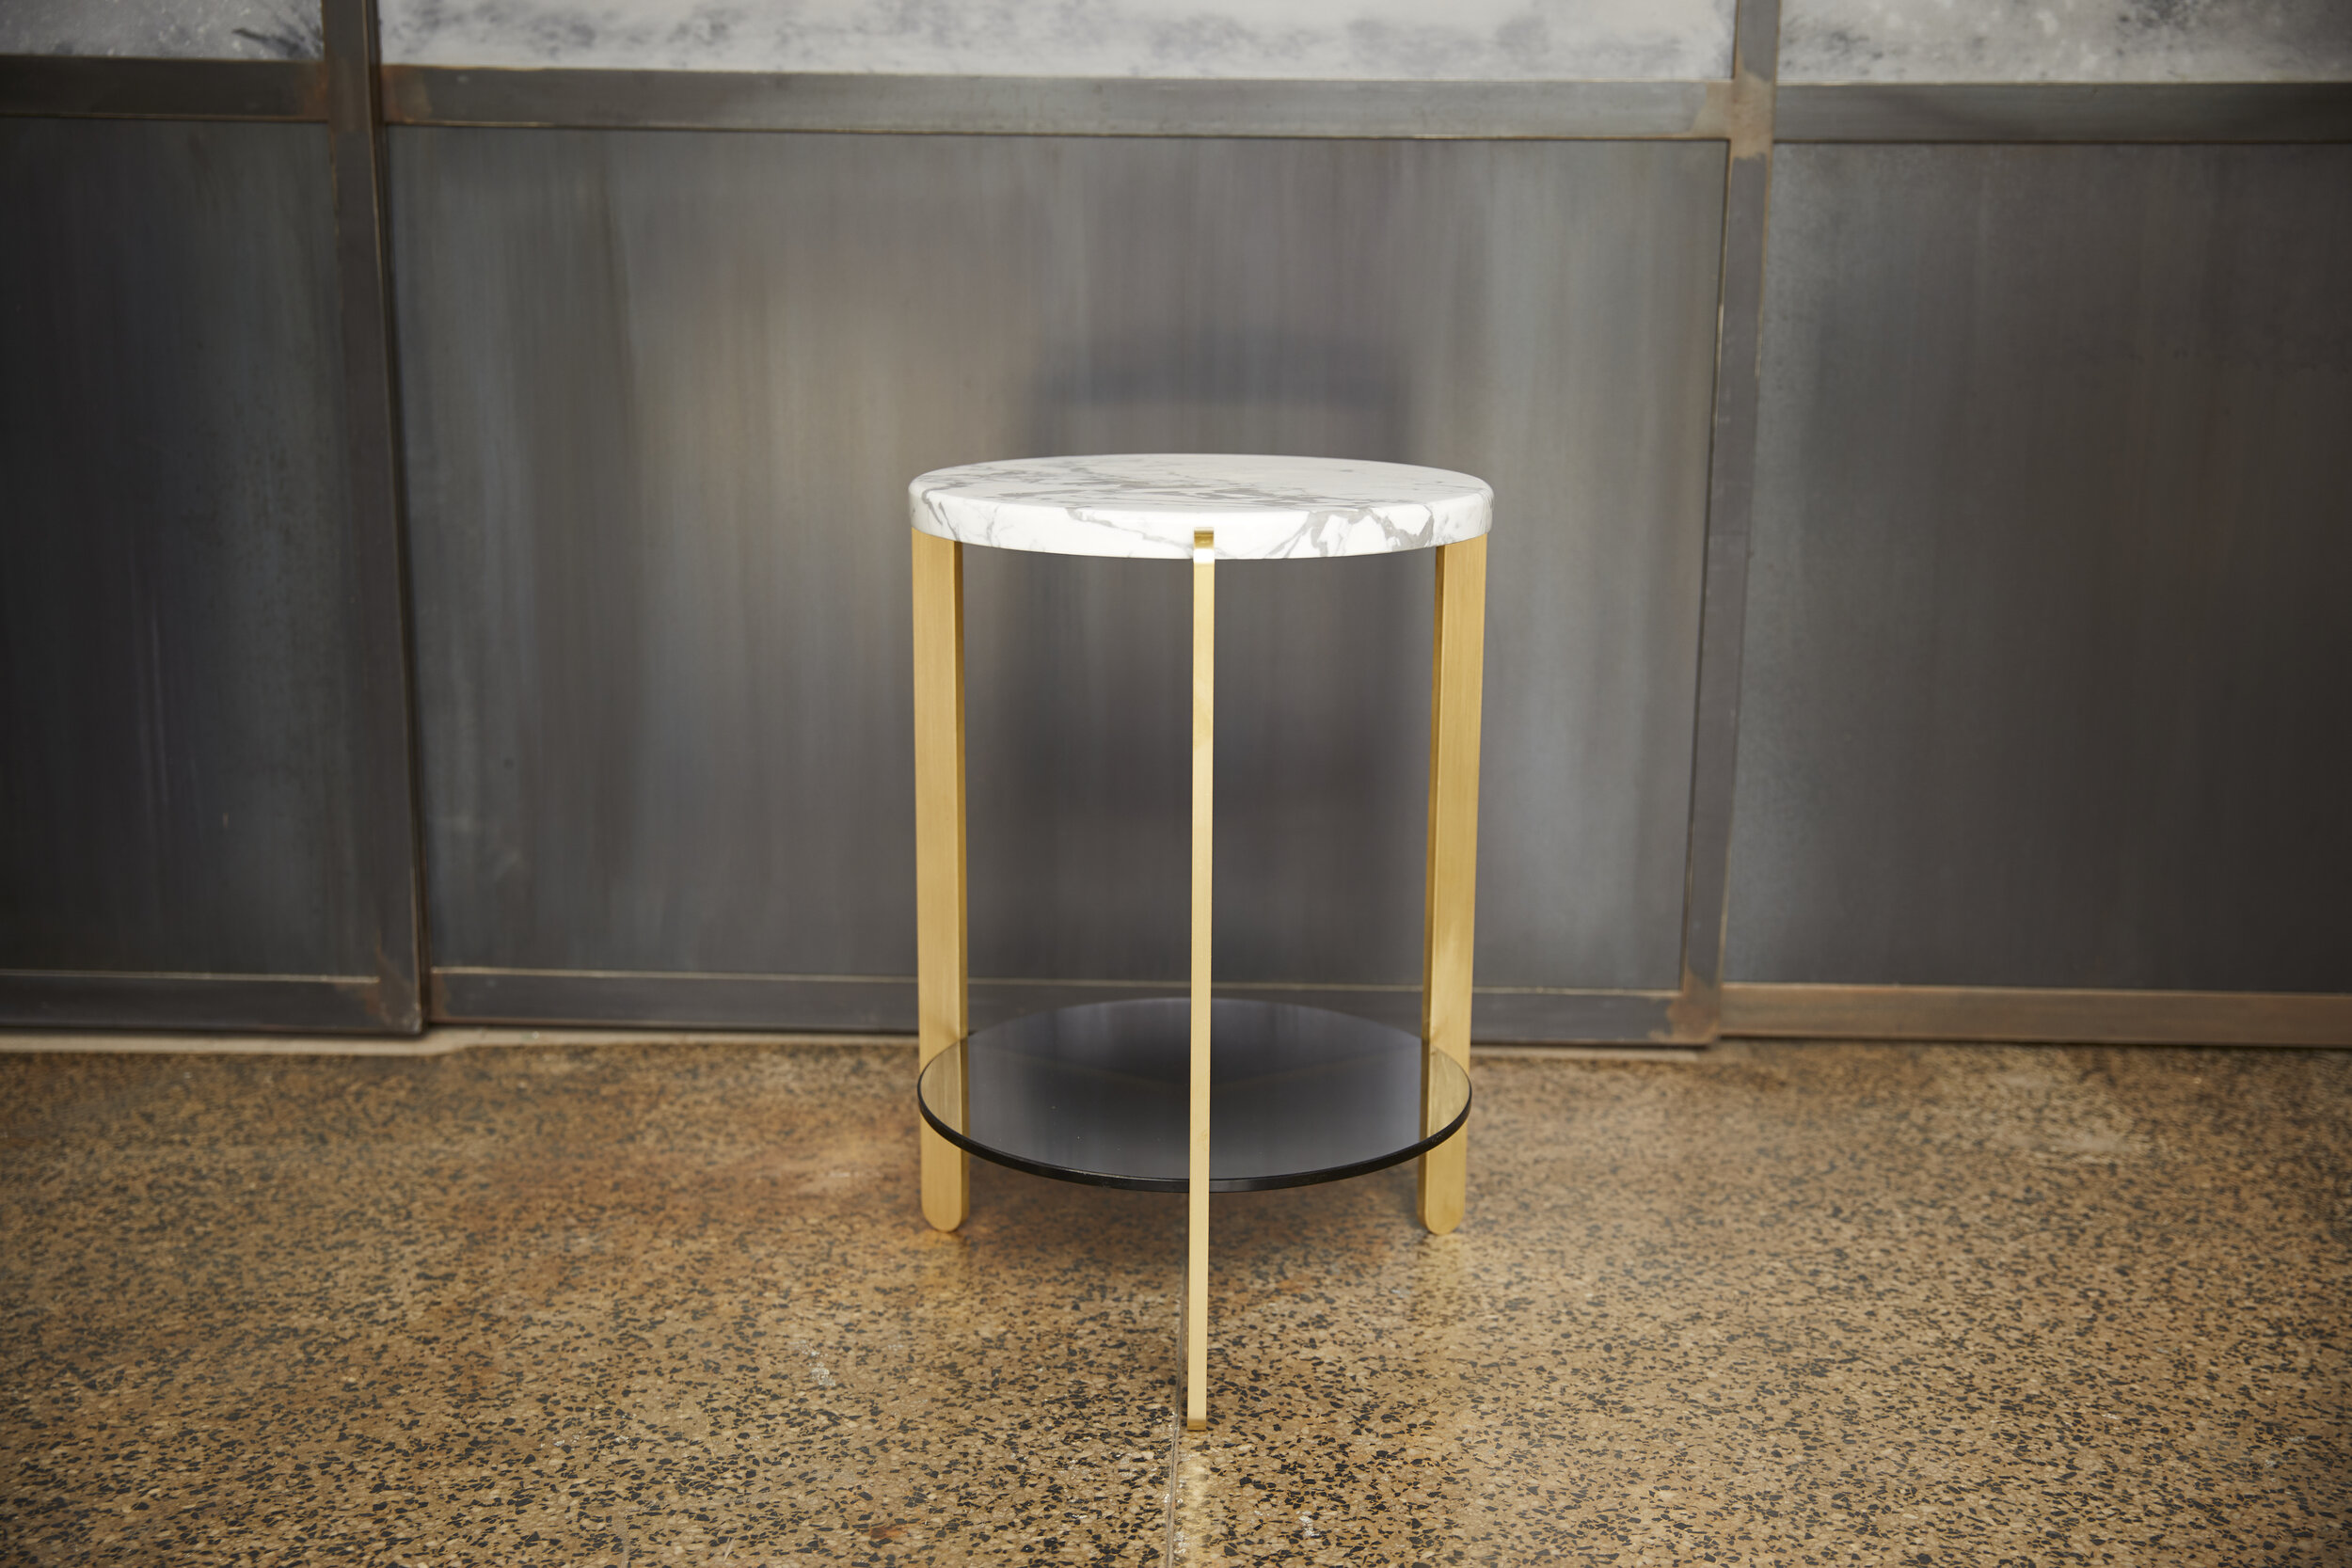 Solid Brass, White Carrara Marble, Grey Acid Etched Glass